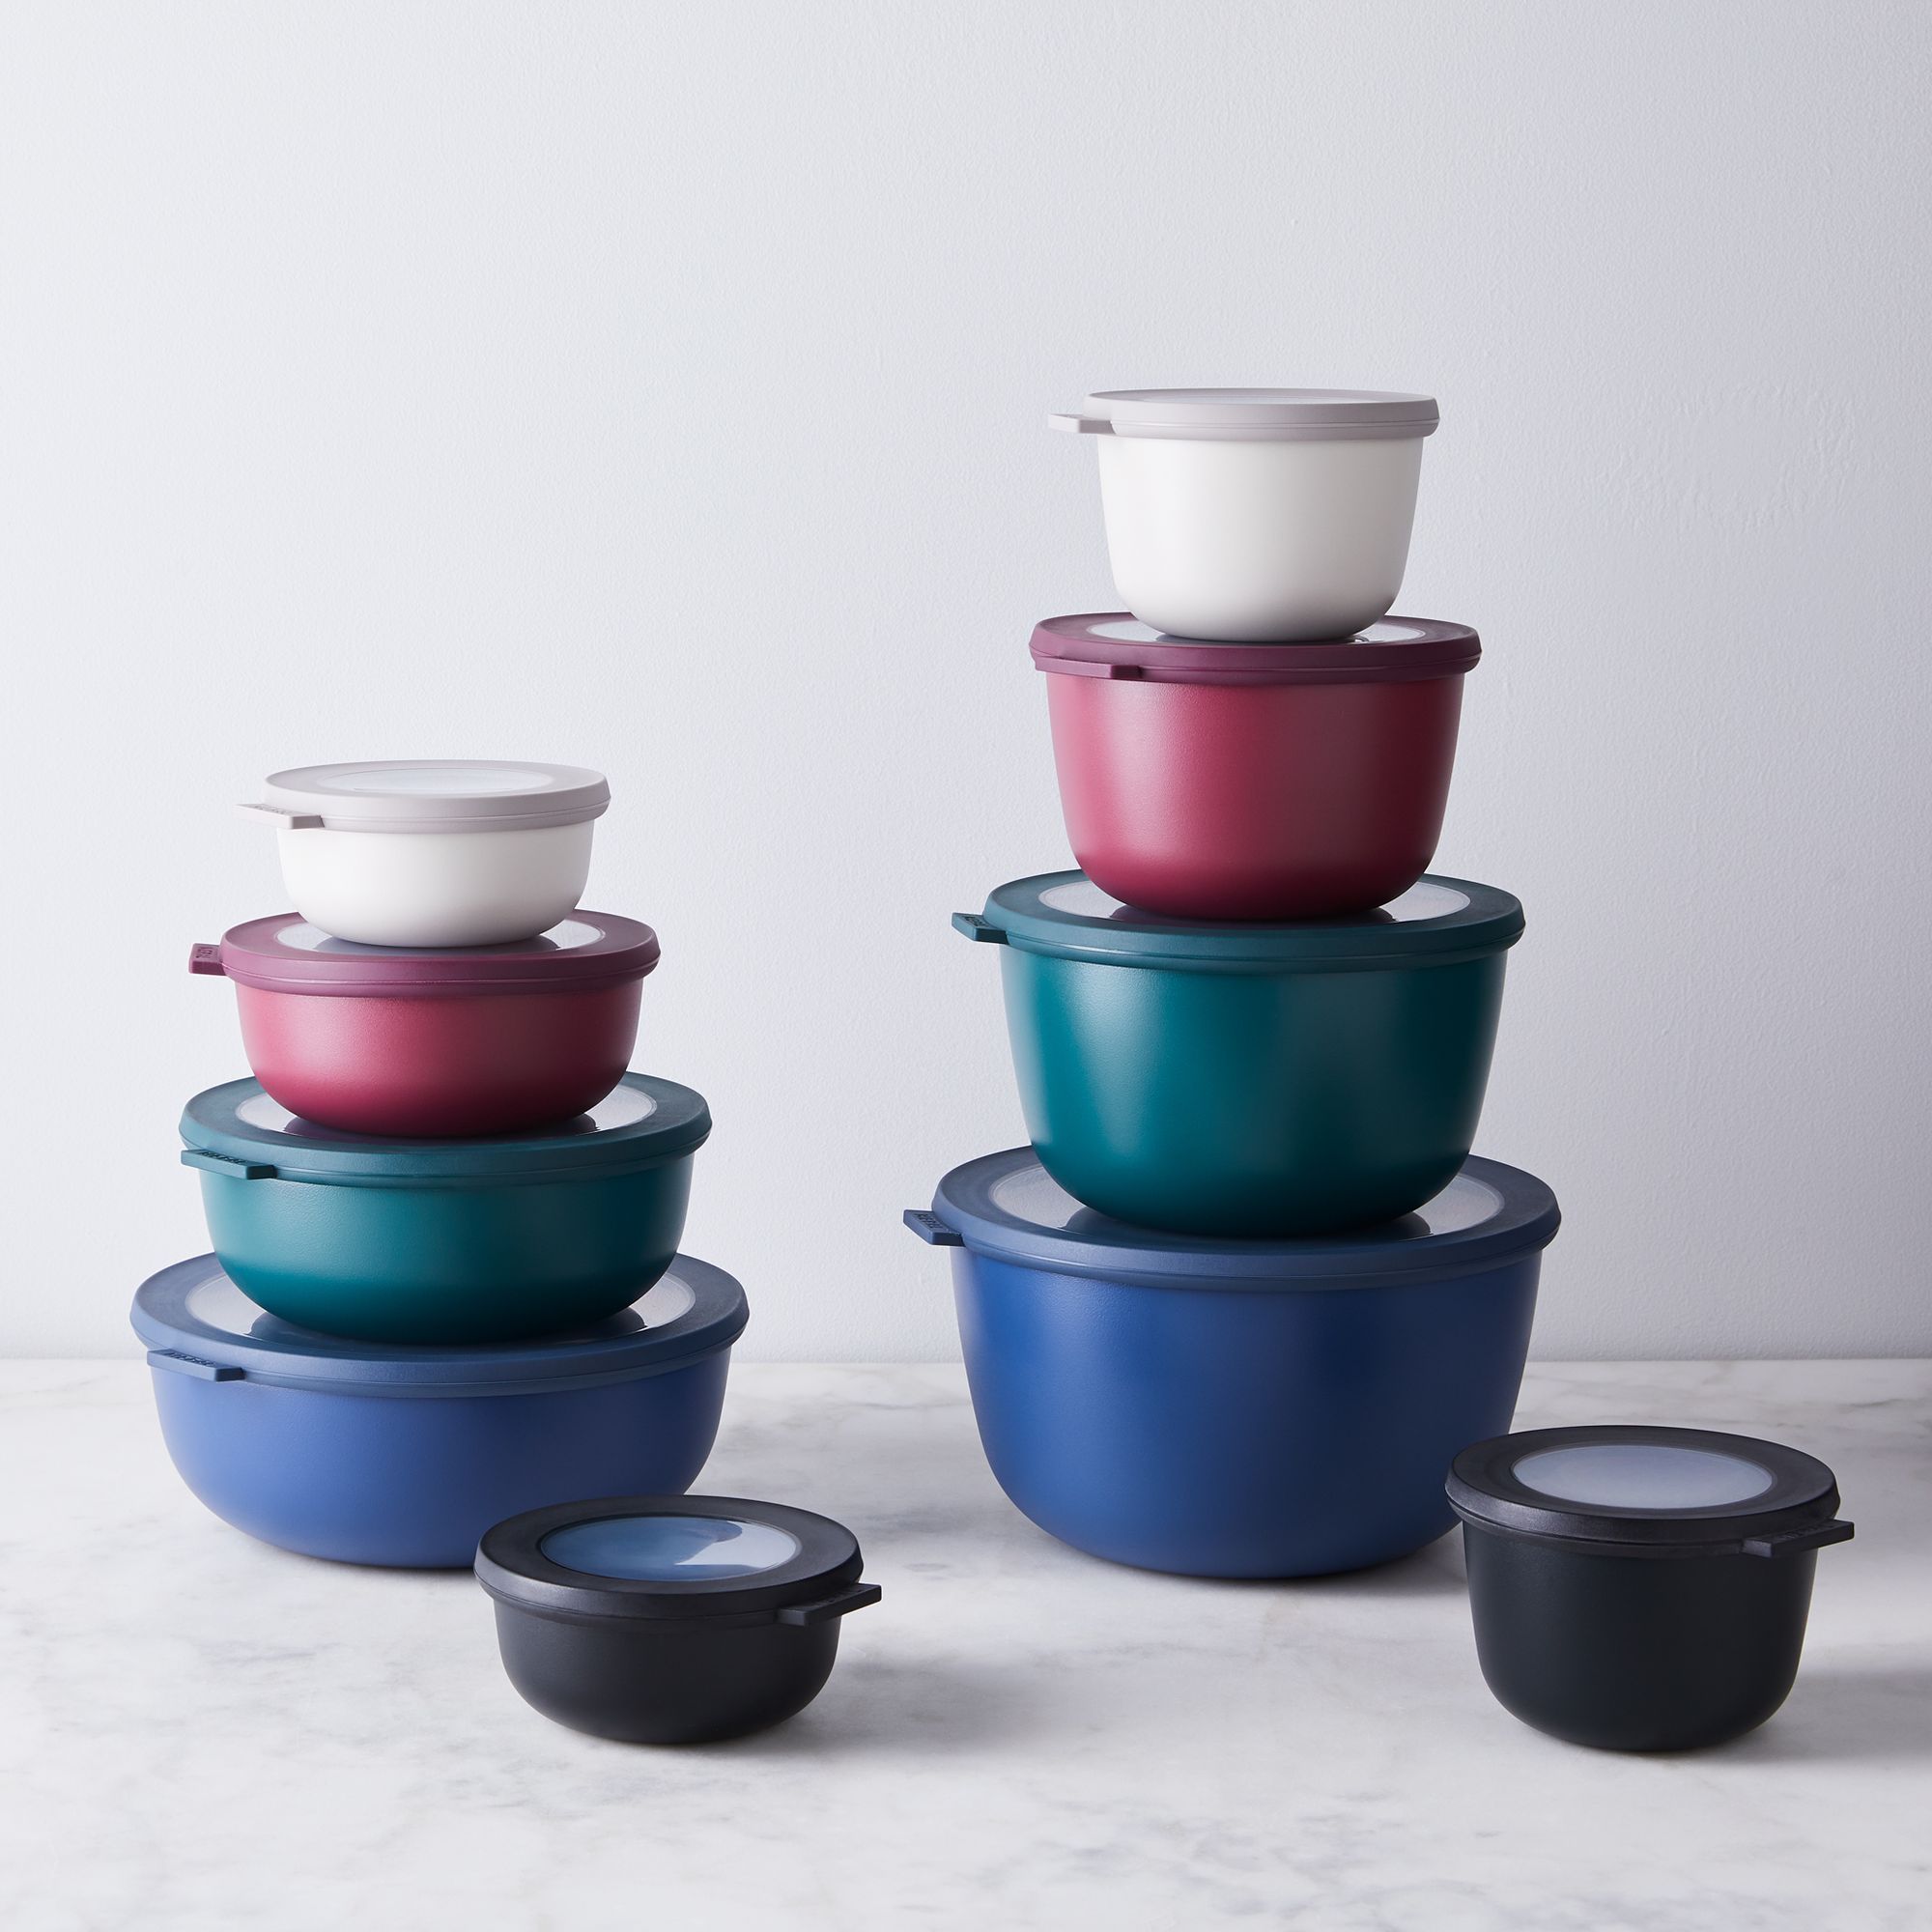 Mepal Nested Storage Bowls in Shallow & Deep Sets, 10 Colors